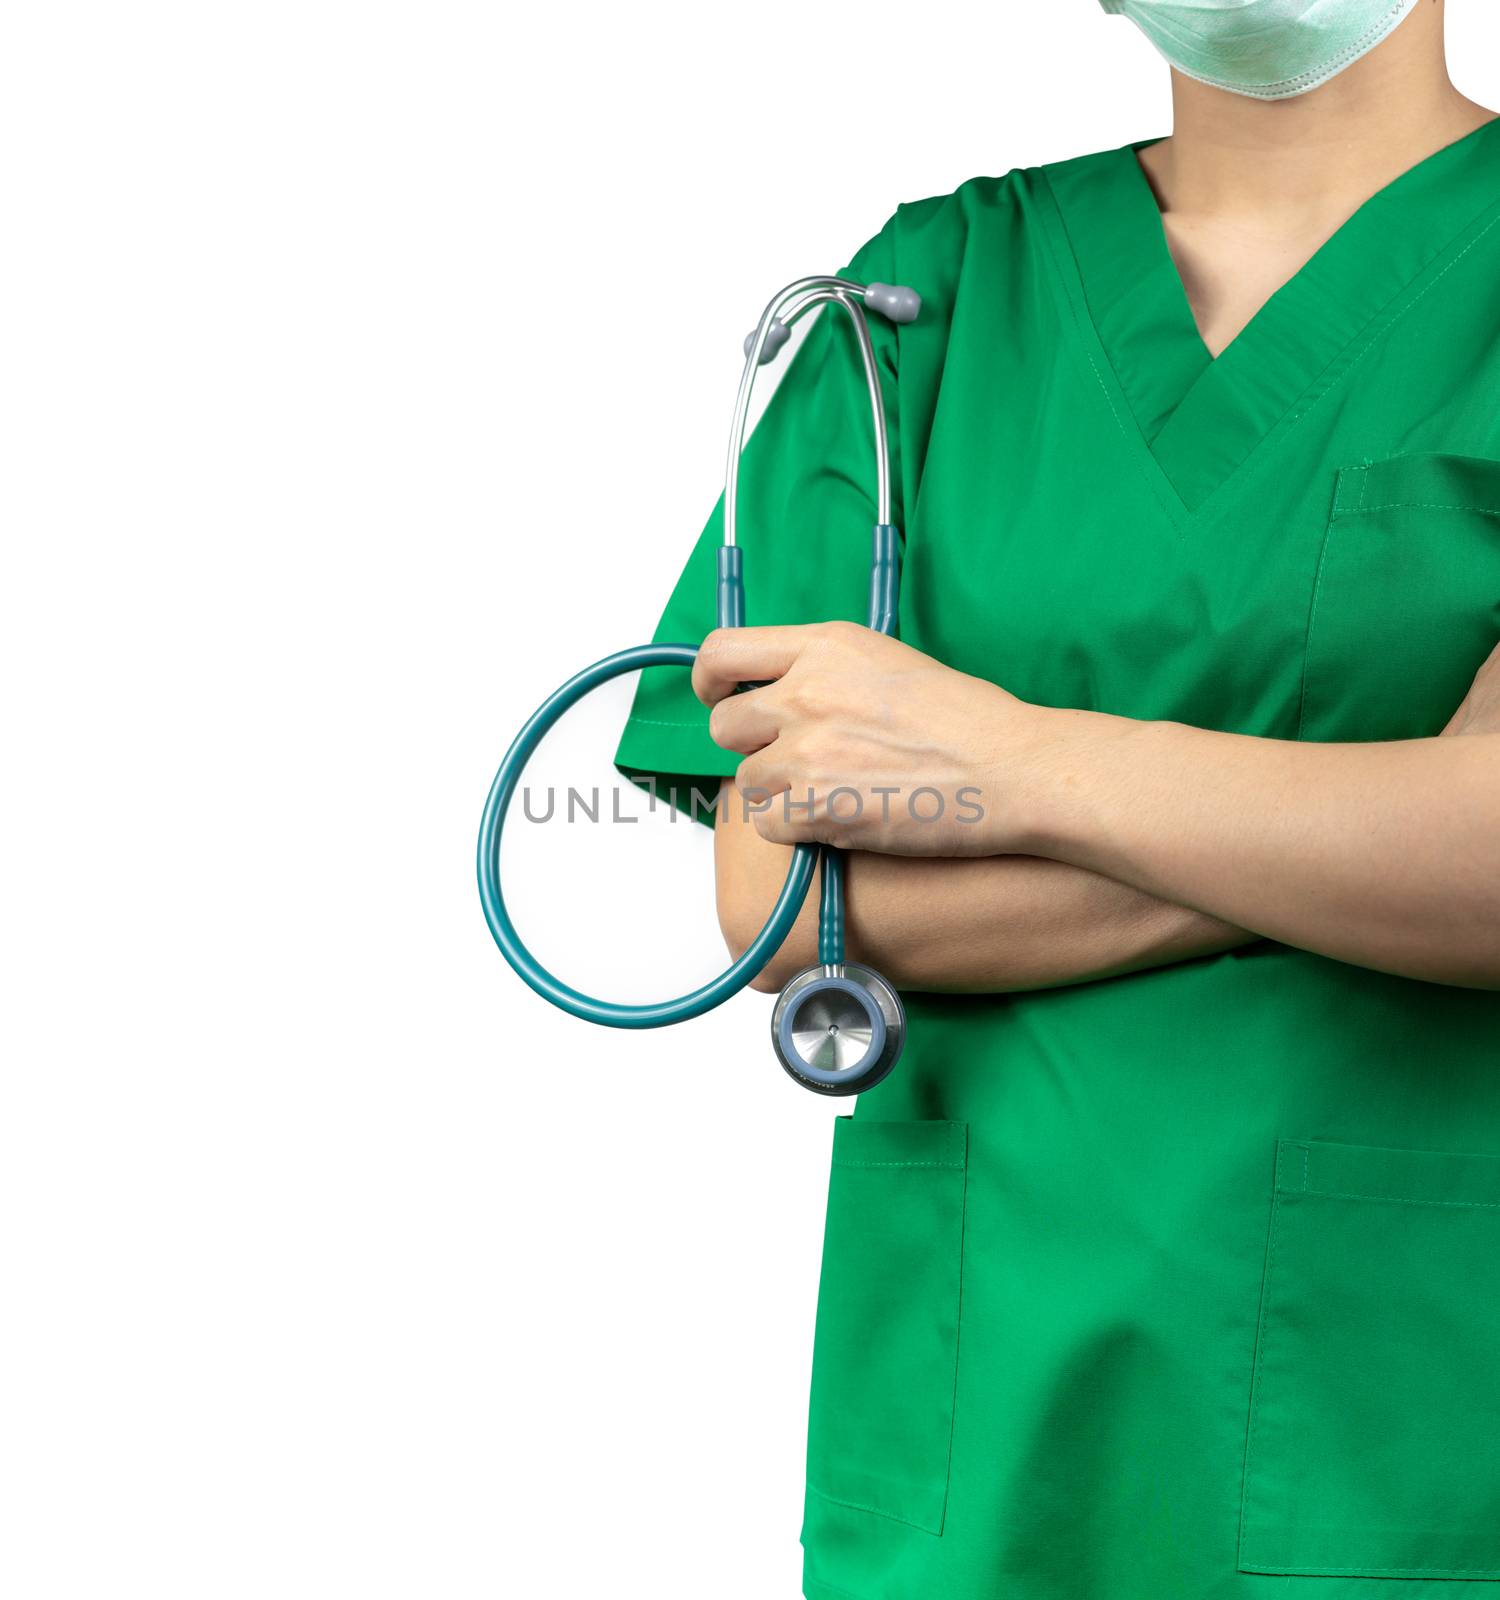 Surgeon doctor wear green scrubs shirt uniform and green face mask. Physician hand holding stethoscope. Healthcare professional. Surgeon doctor stand with confidence. Patient trust concept.